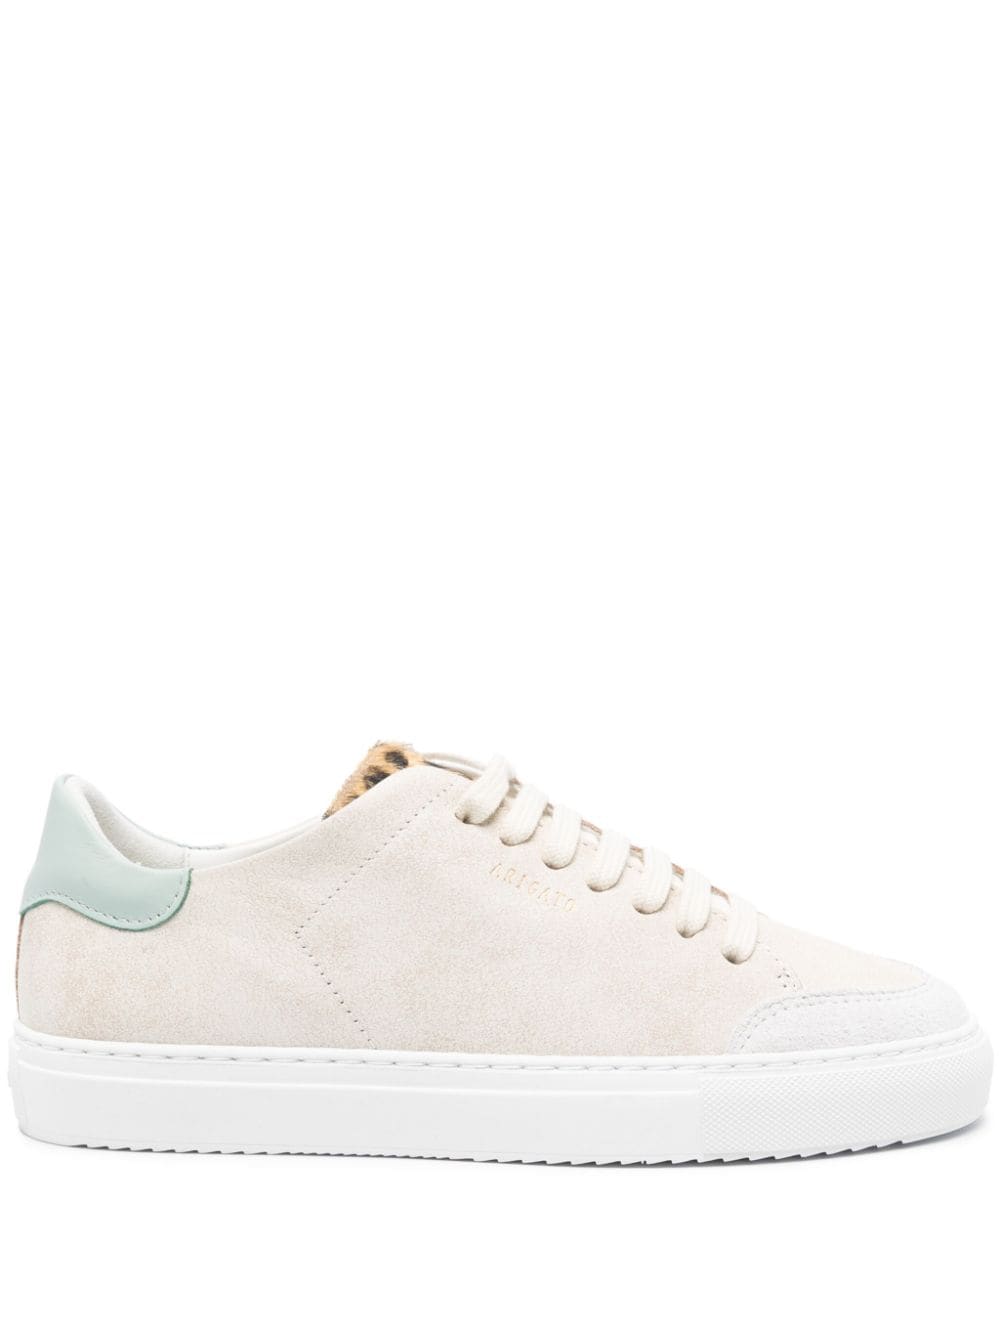 Axel Arigato Clean 90 Leather Sneakers In Neutrals